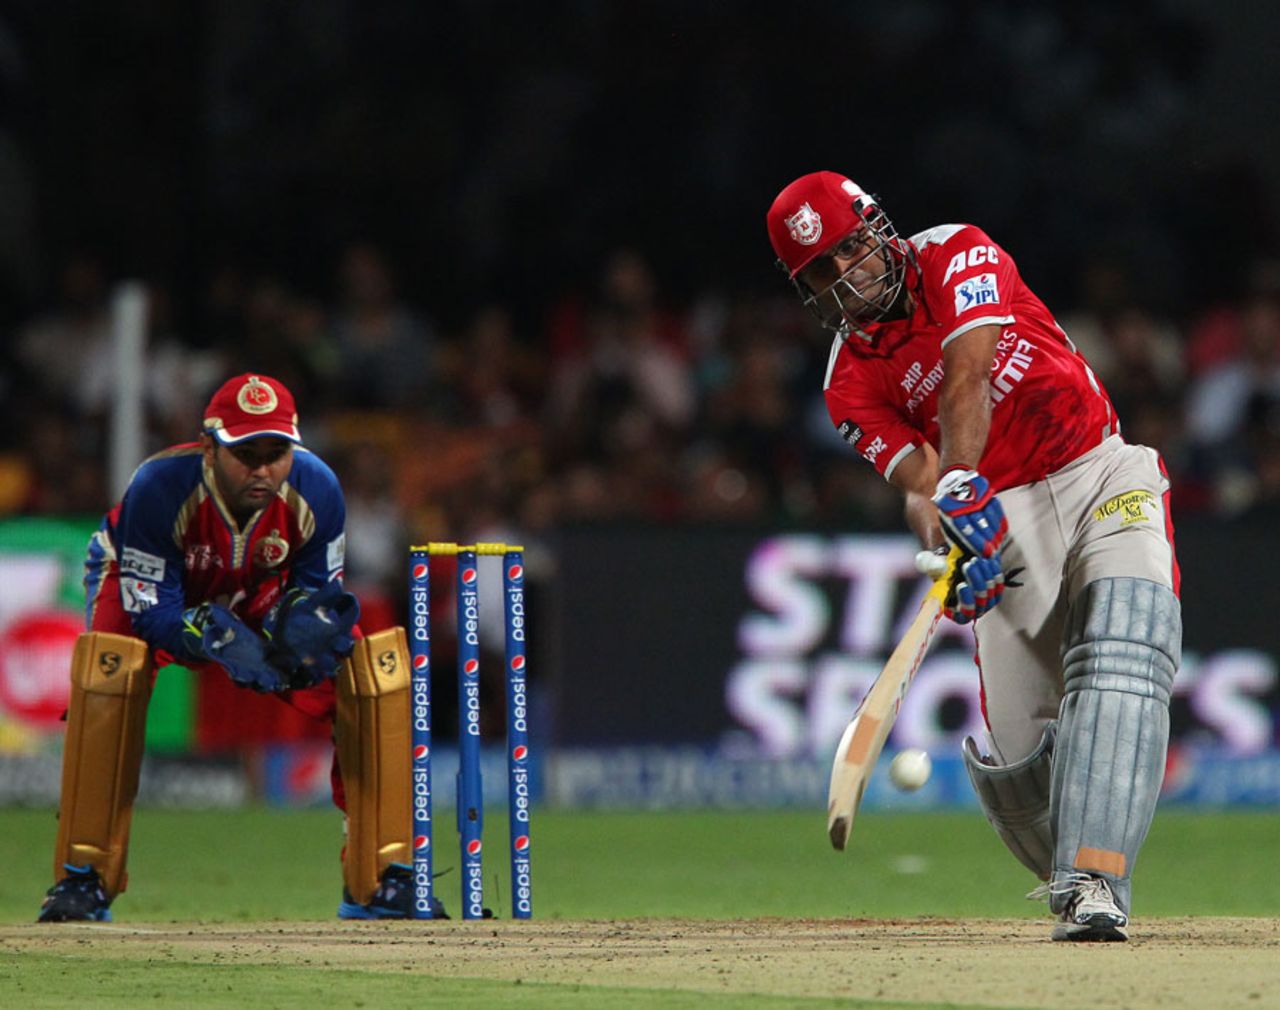 Virender Sehwag tries to launch into a delivery from Yuzvendra Chahal, Royal Challengers Bangalore v Kings XI Punjab, IPL 2014, Bangalore, May 9, 2014